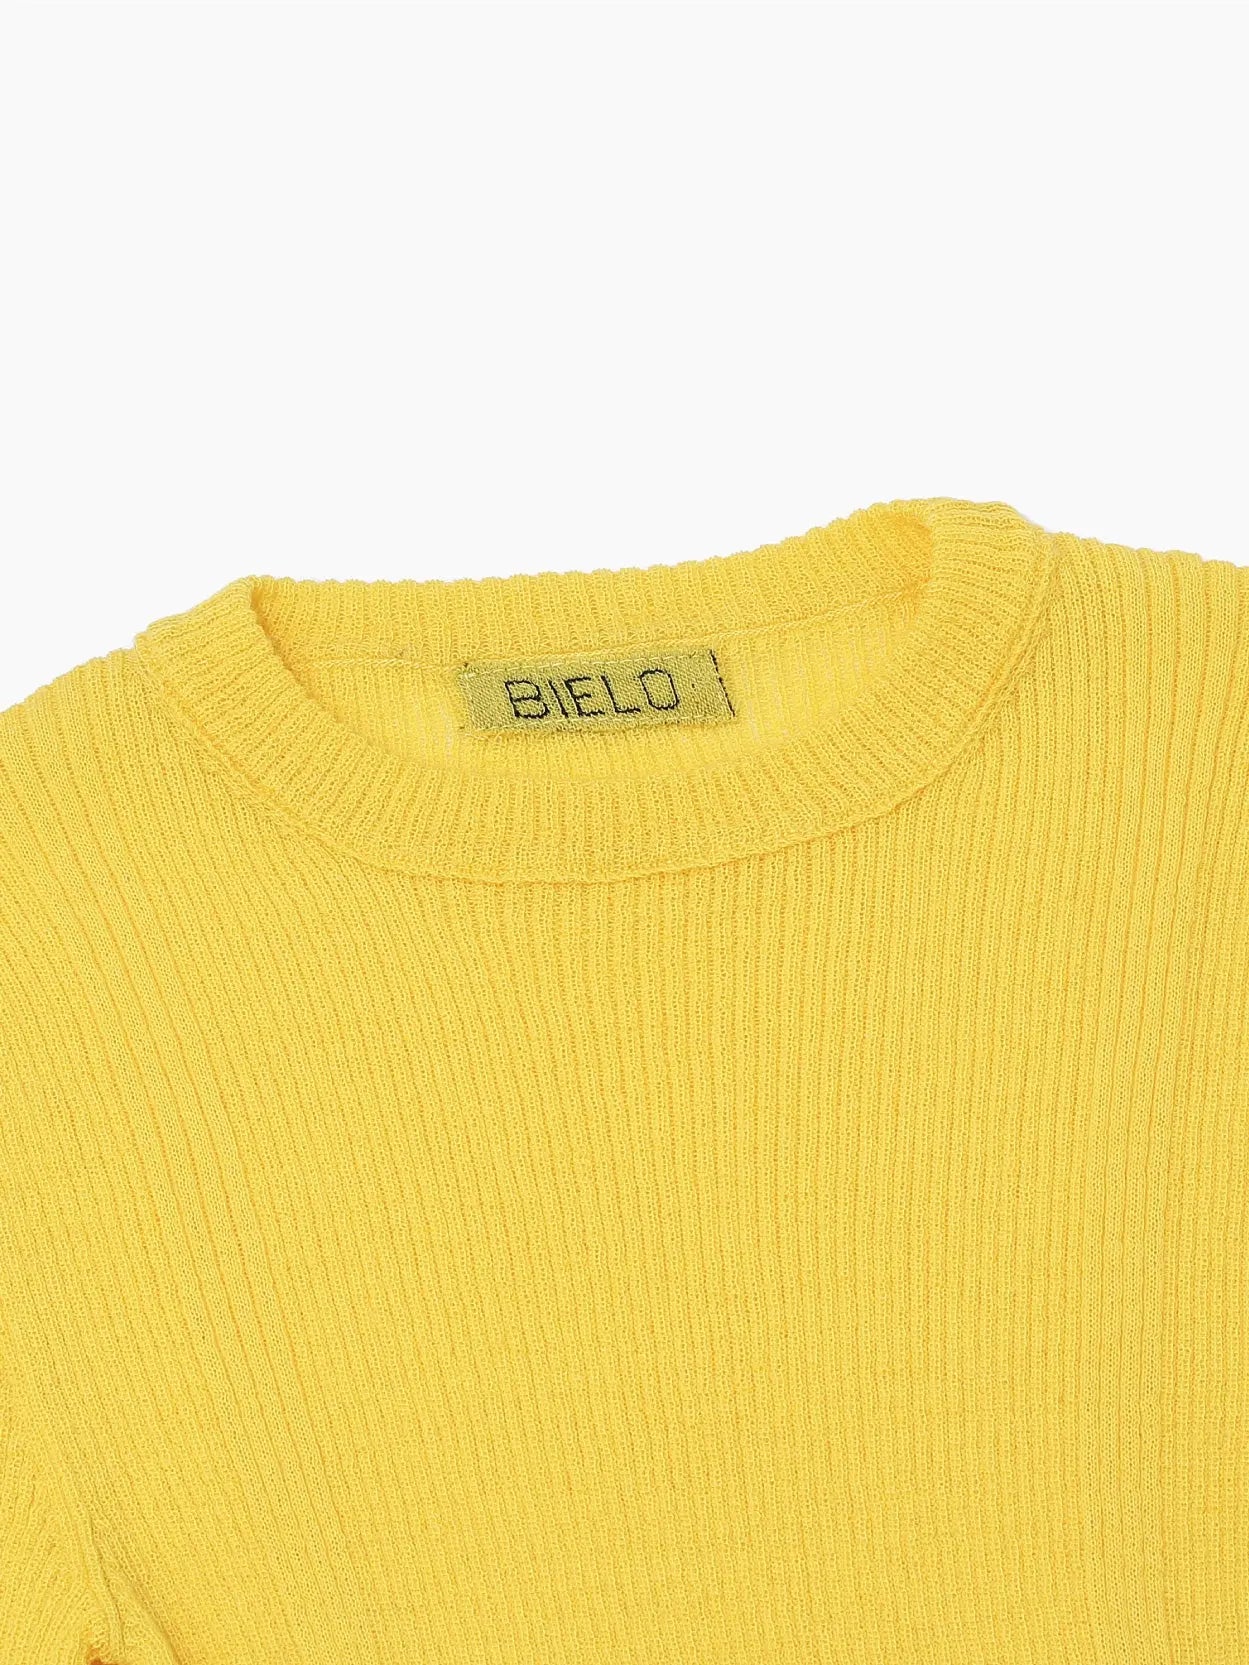 Bright yellow, long-sleeve, crew-neck sweater with a ribbed texture. The Masla Long Sleeve Yellow by Bielo has a snug fit and a simple, minimalist design, perfect for casual or semi-casual wear. Displayed on a plain white background, it's an ideal find from our Barcelona store collection at bassalstore.